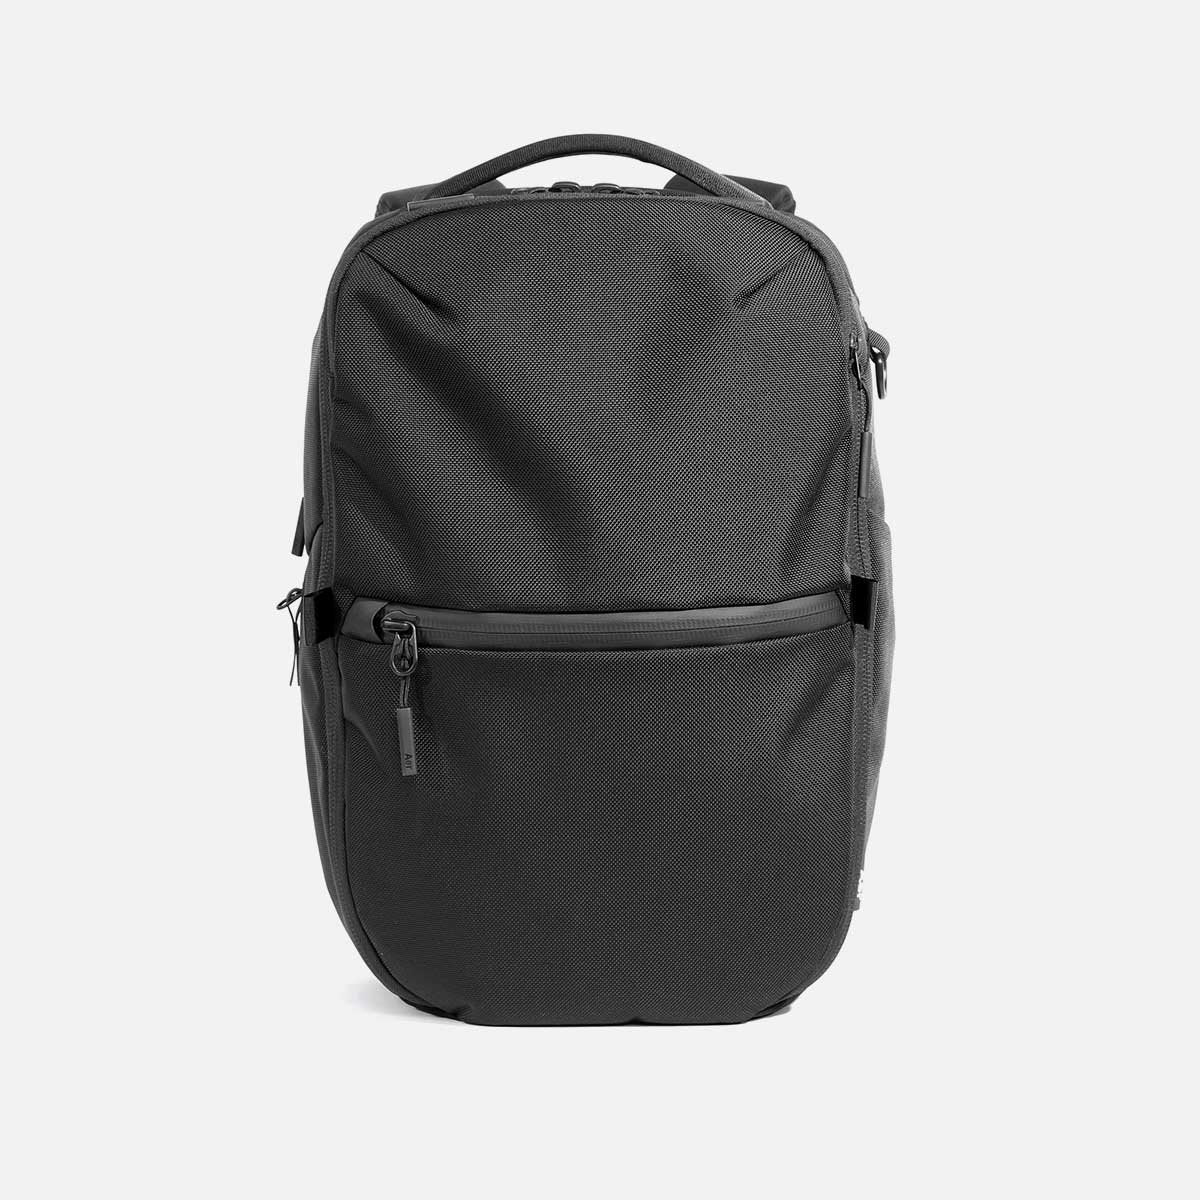 Aer City Pack Pro the best work backpacks – Mined